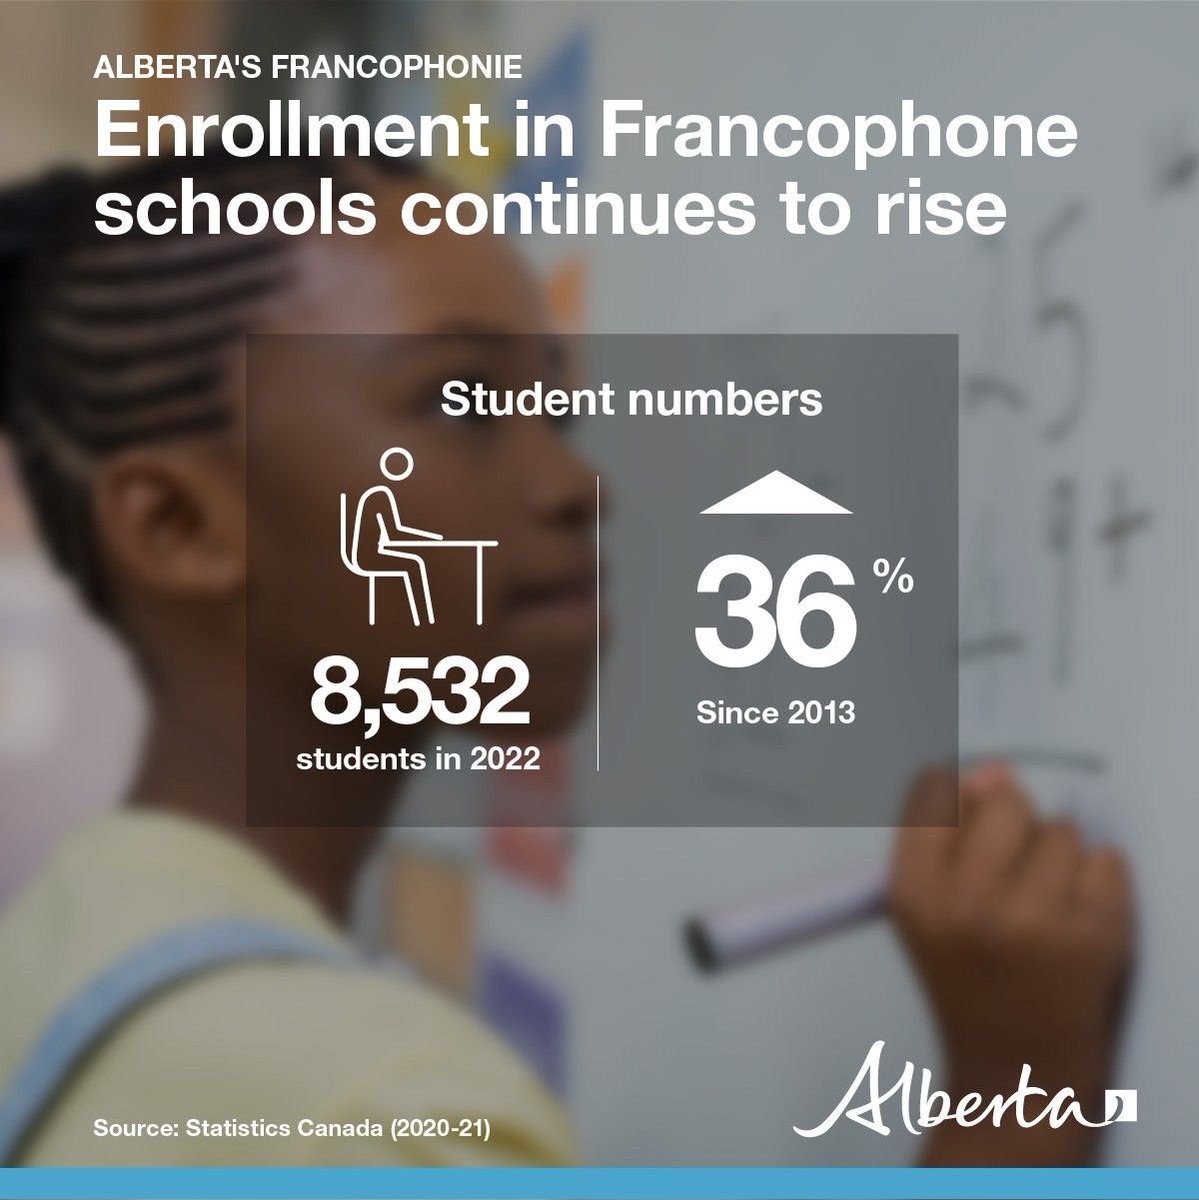 #frab fact: Enrolment in Francophone schools has increased by over 36% in Alberta since 2013. #moisFRAB